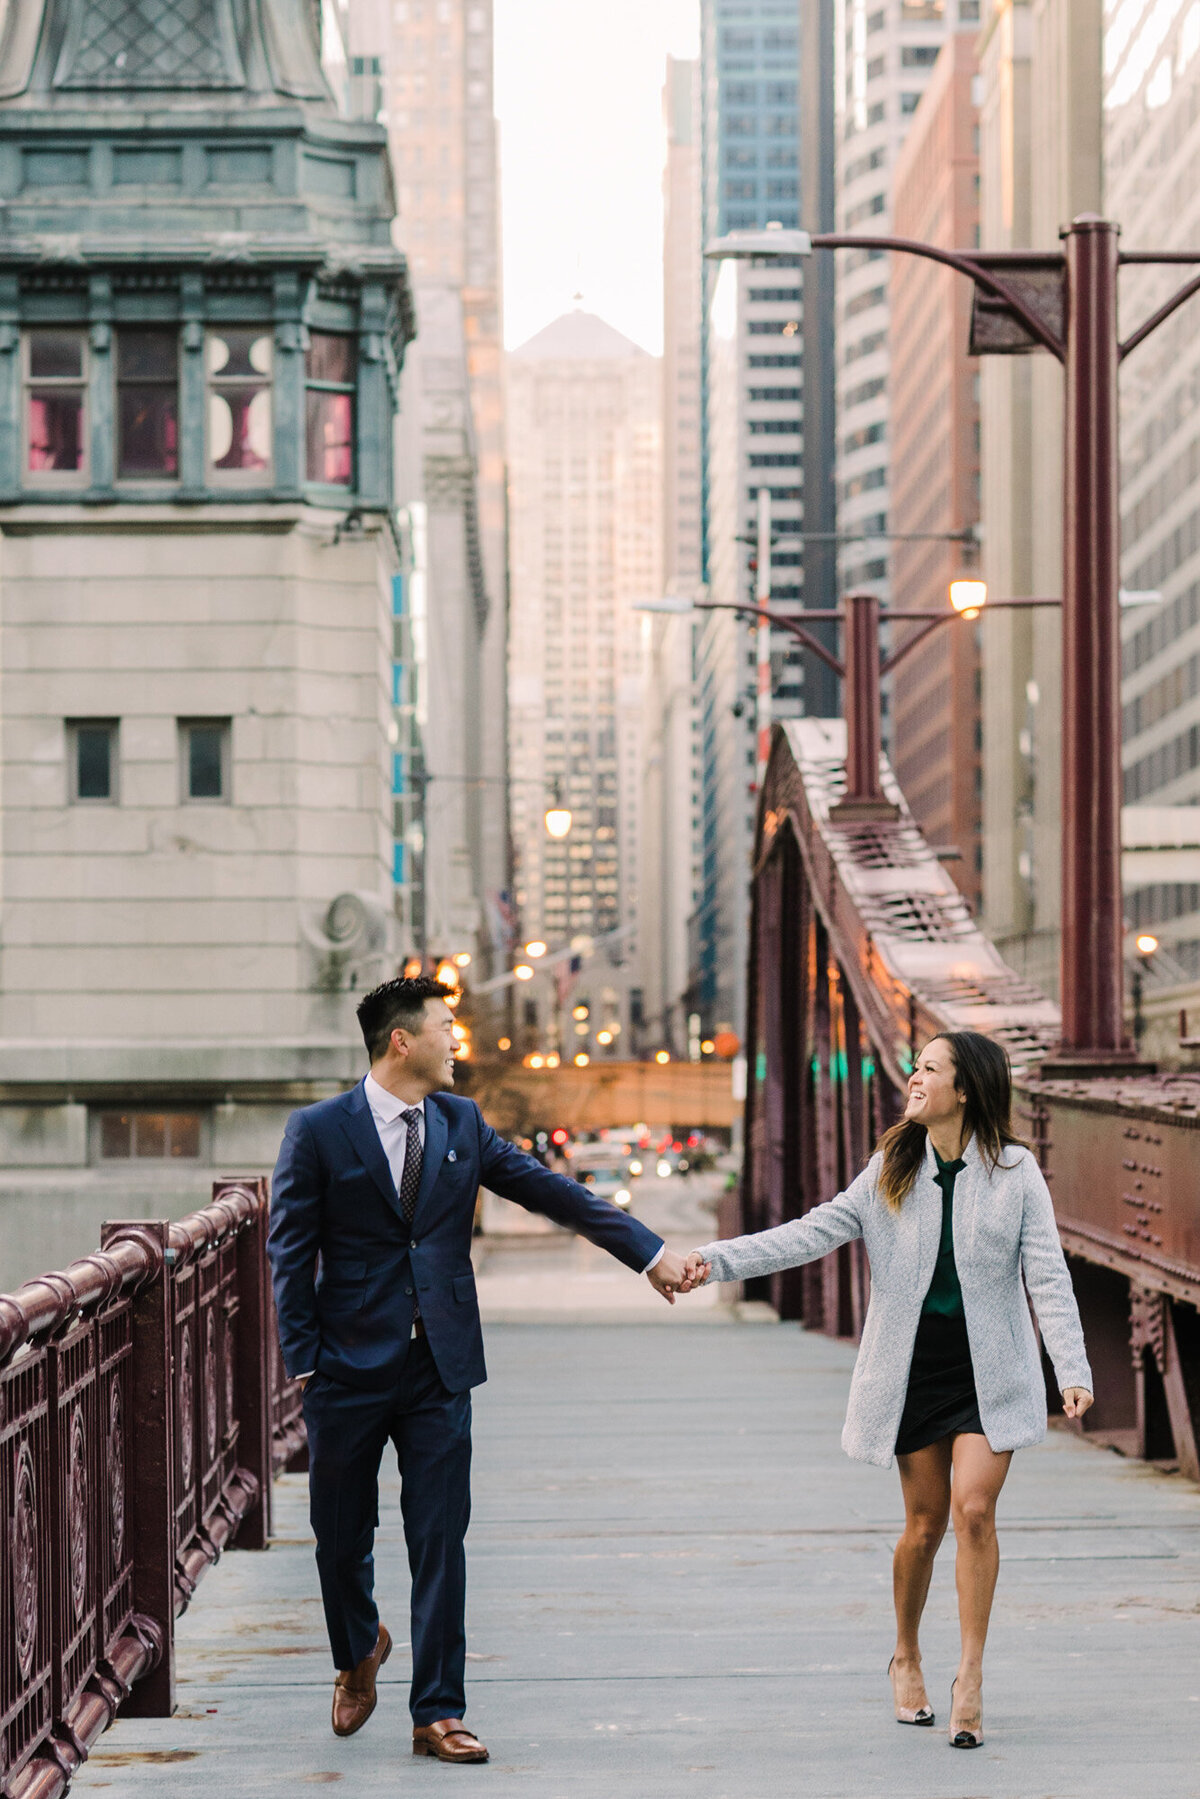 A sunrise engagement photo taken in downtown Chicago